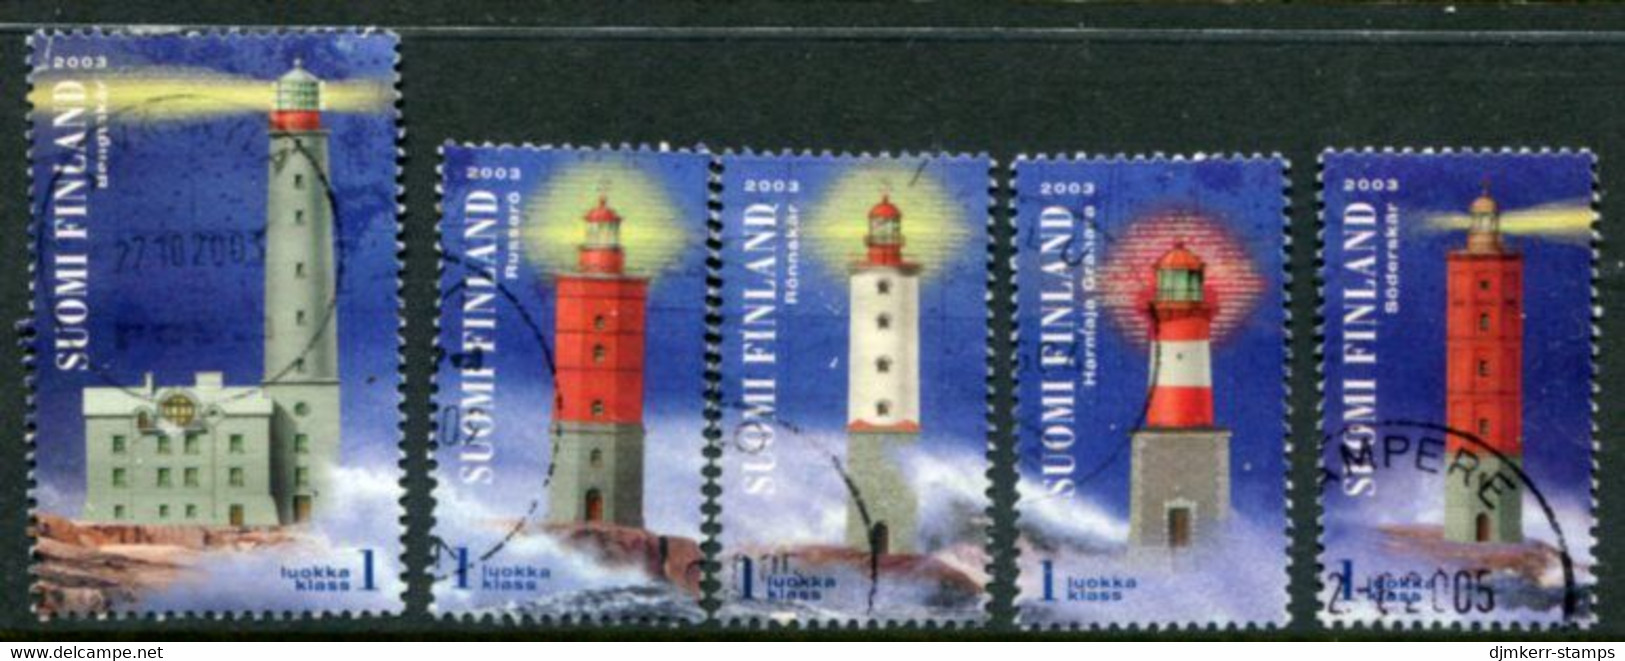 FINLAND 2003 Lighthouses Singles Ex Block Used.  Michel  1670-74 - Used Stamps